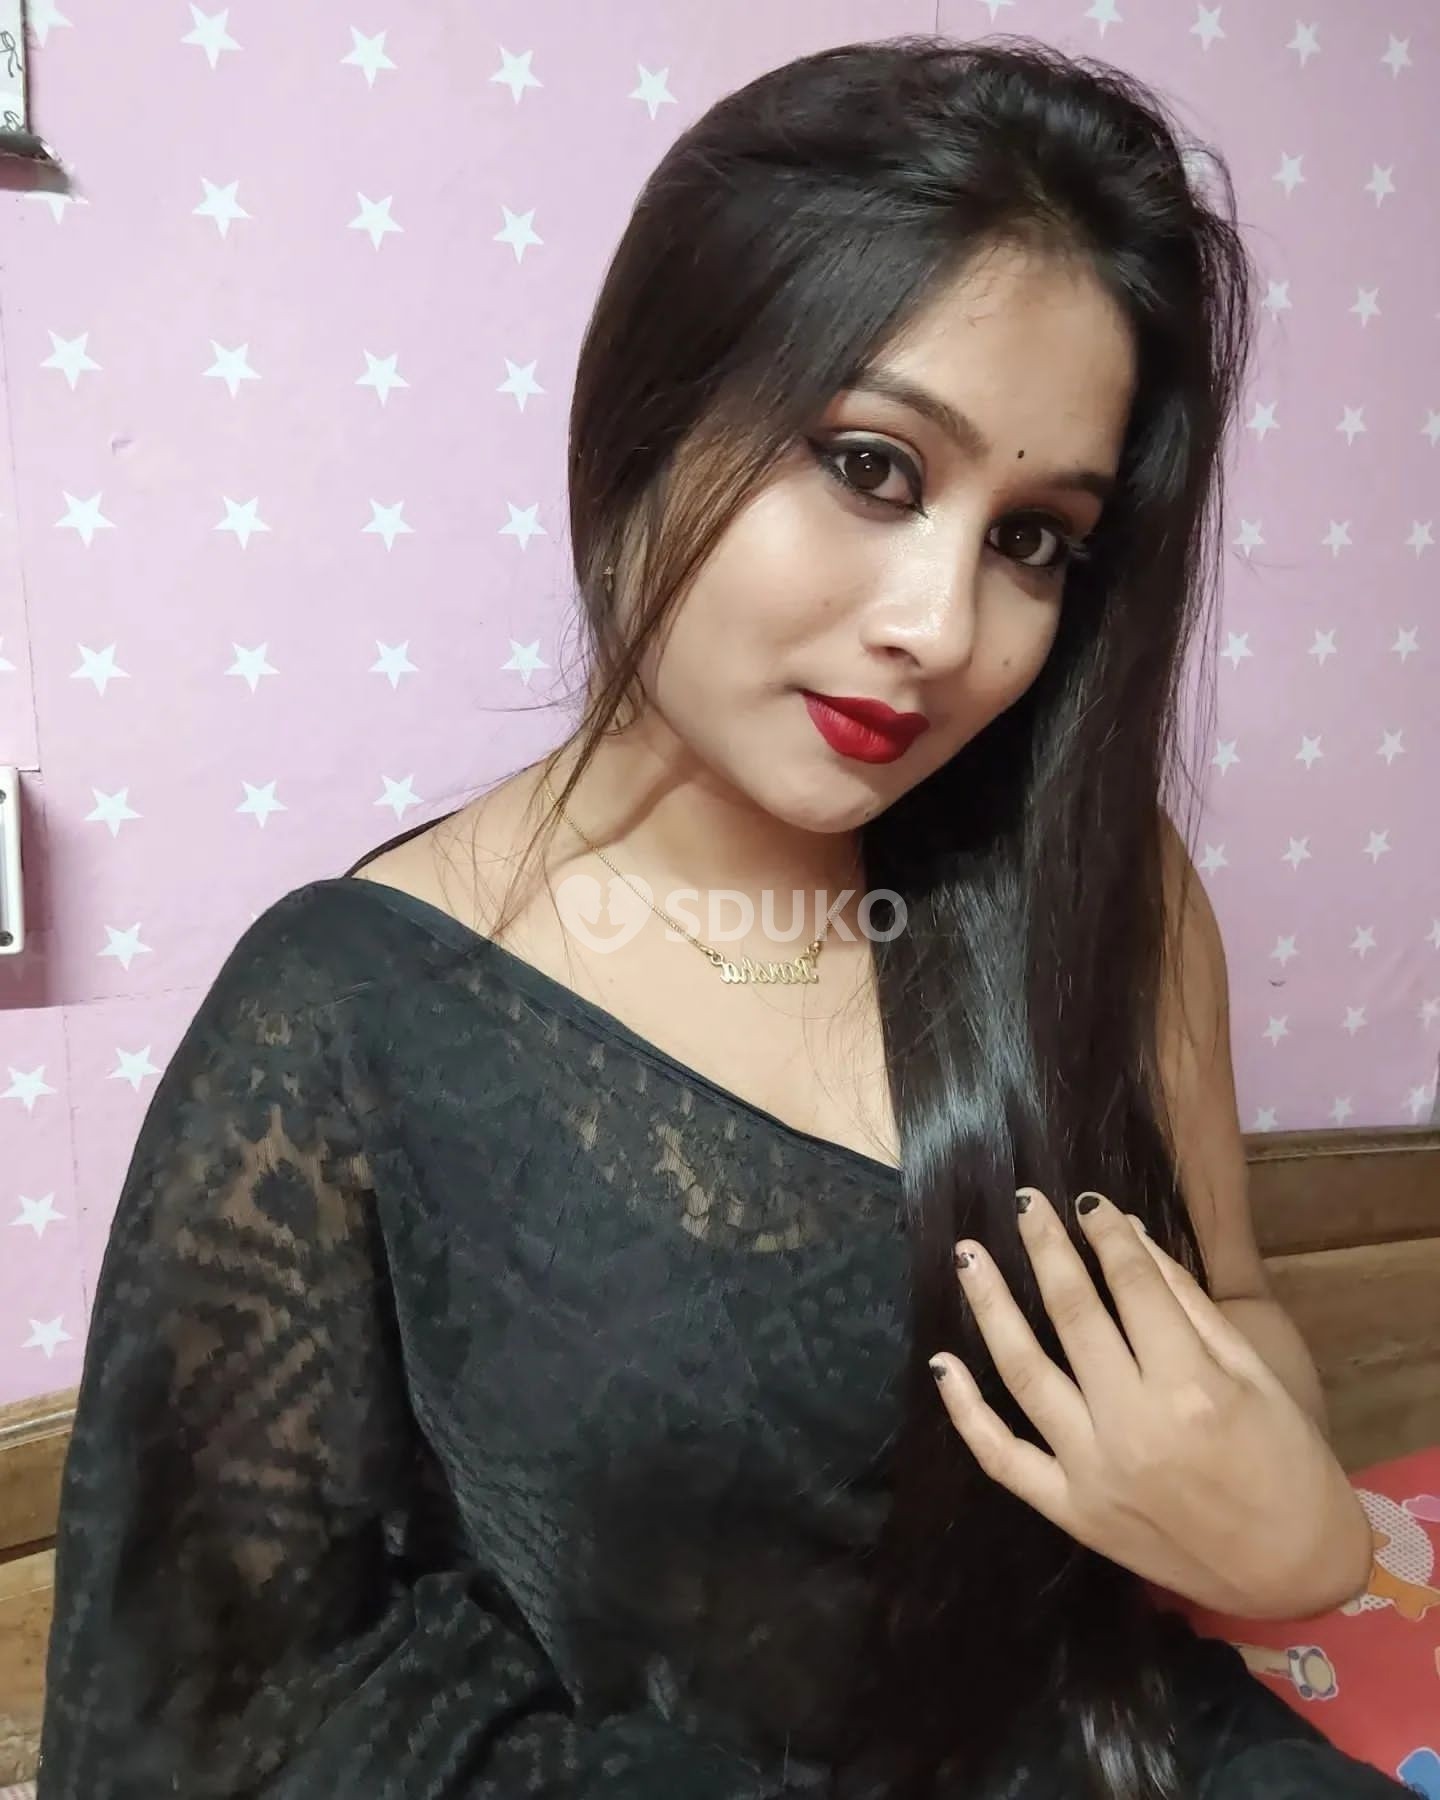 LUDHIANA HIGH PROFILE HOT SEXY VIP INDEPENDENT COLLEGE GIRLS HOUSEWIFE ANYTIME CALL ME